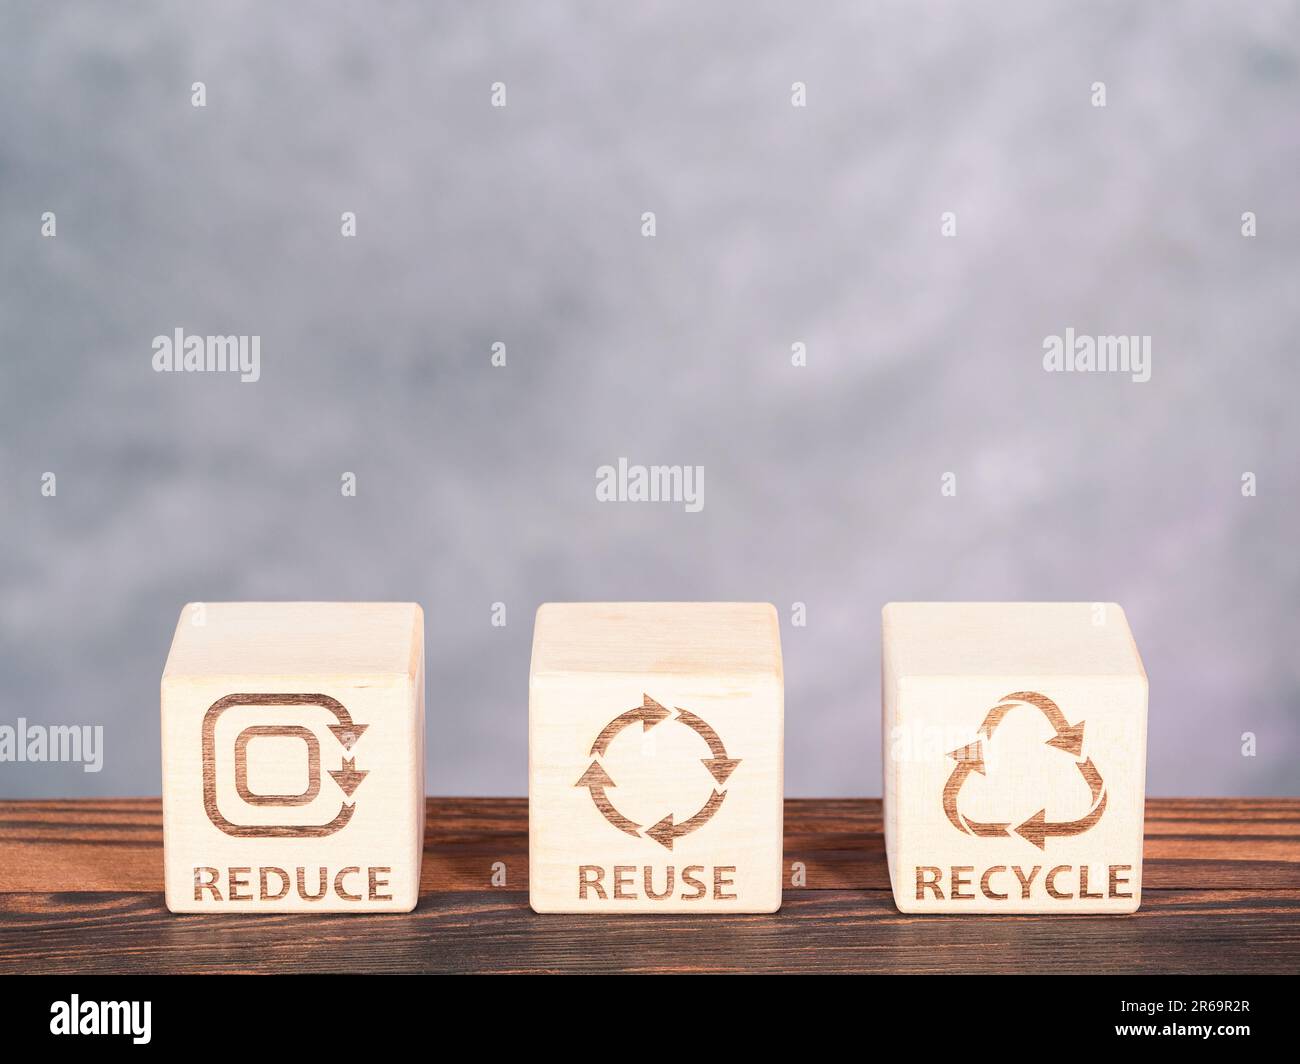 Reduce, Reuse, and Recycle symbols as a resources conservation business concept Stock Photo